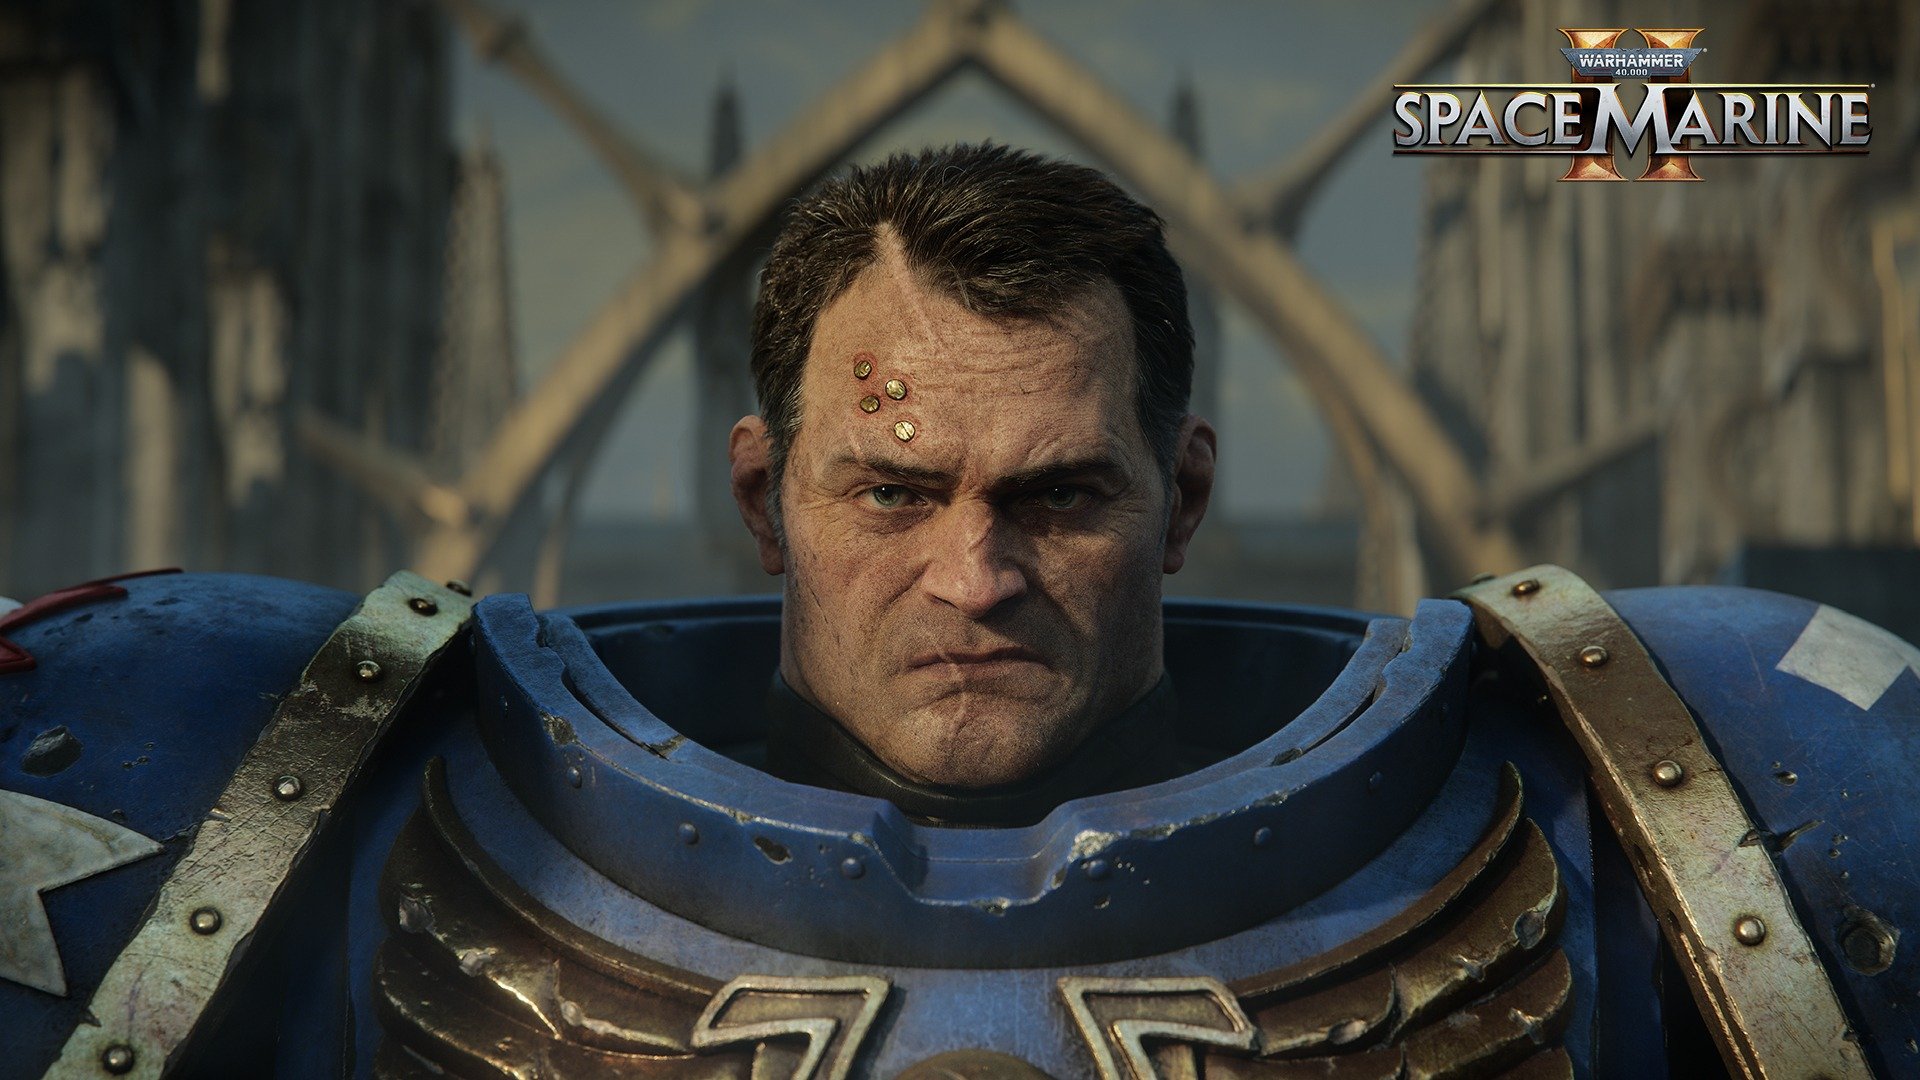 Image of a Space Marine without a helmet.